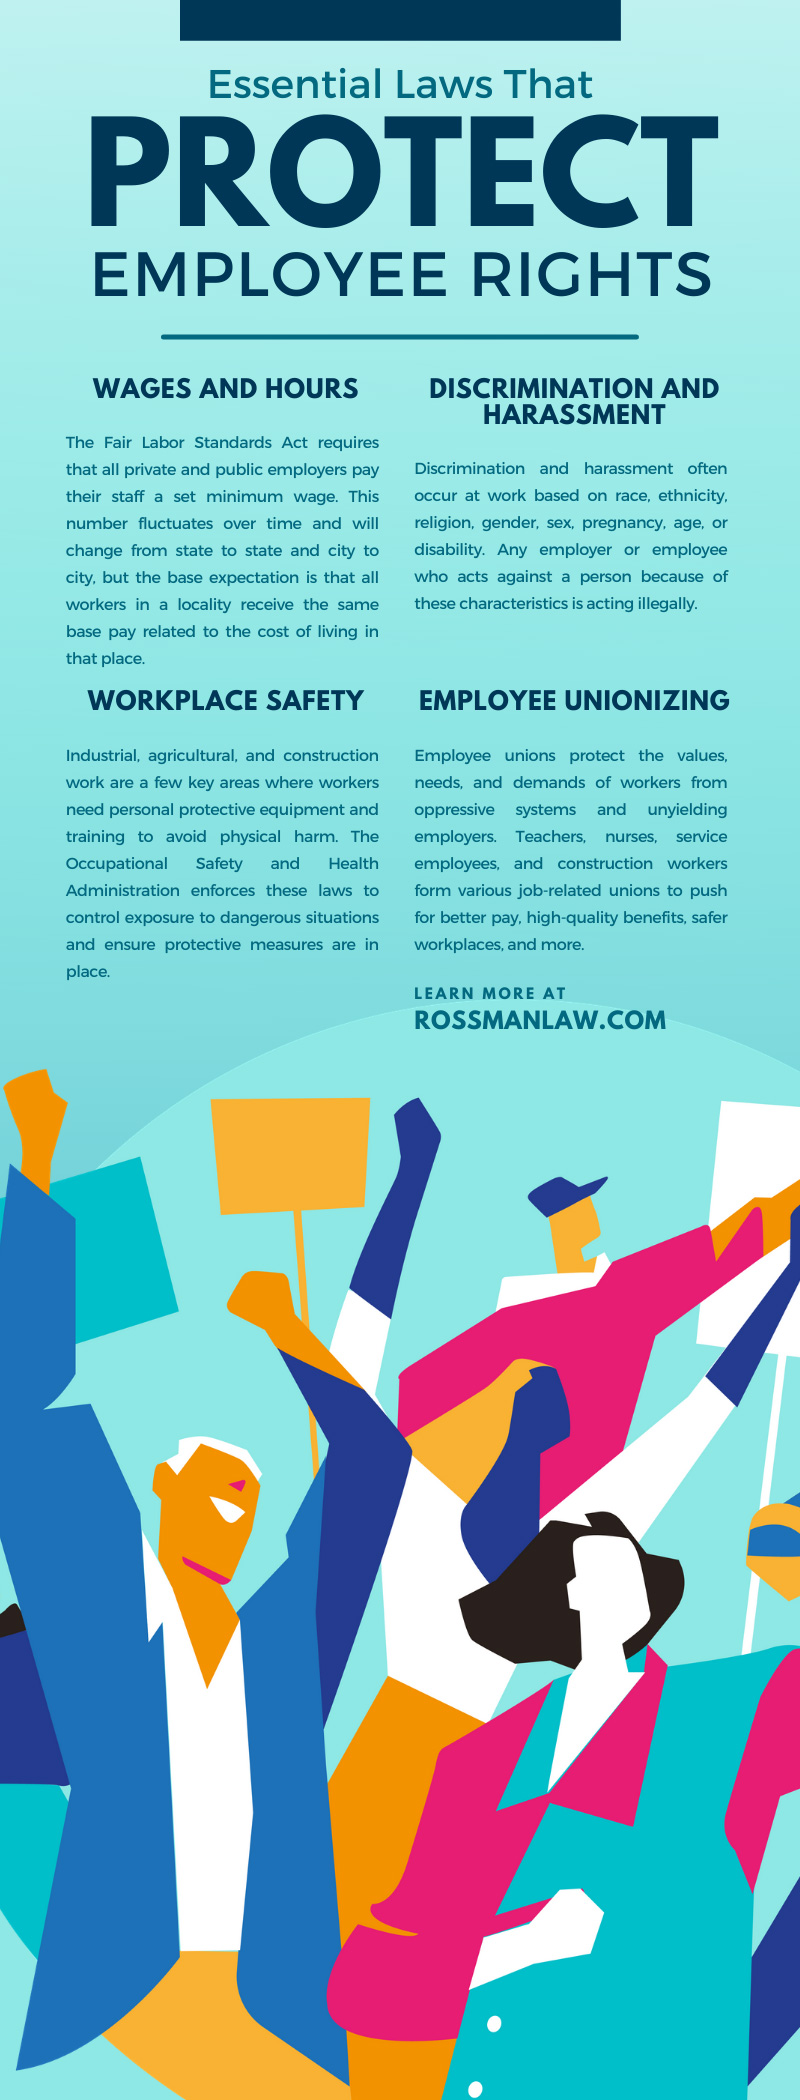 Essential Laws That Protect Employee Rights 